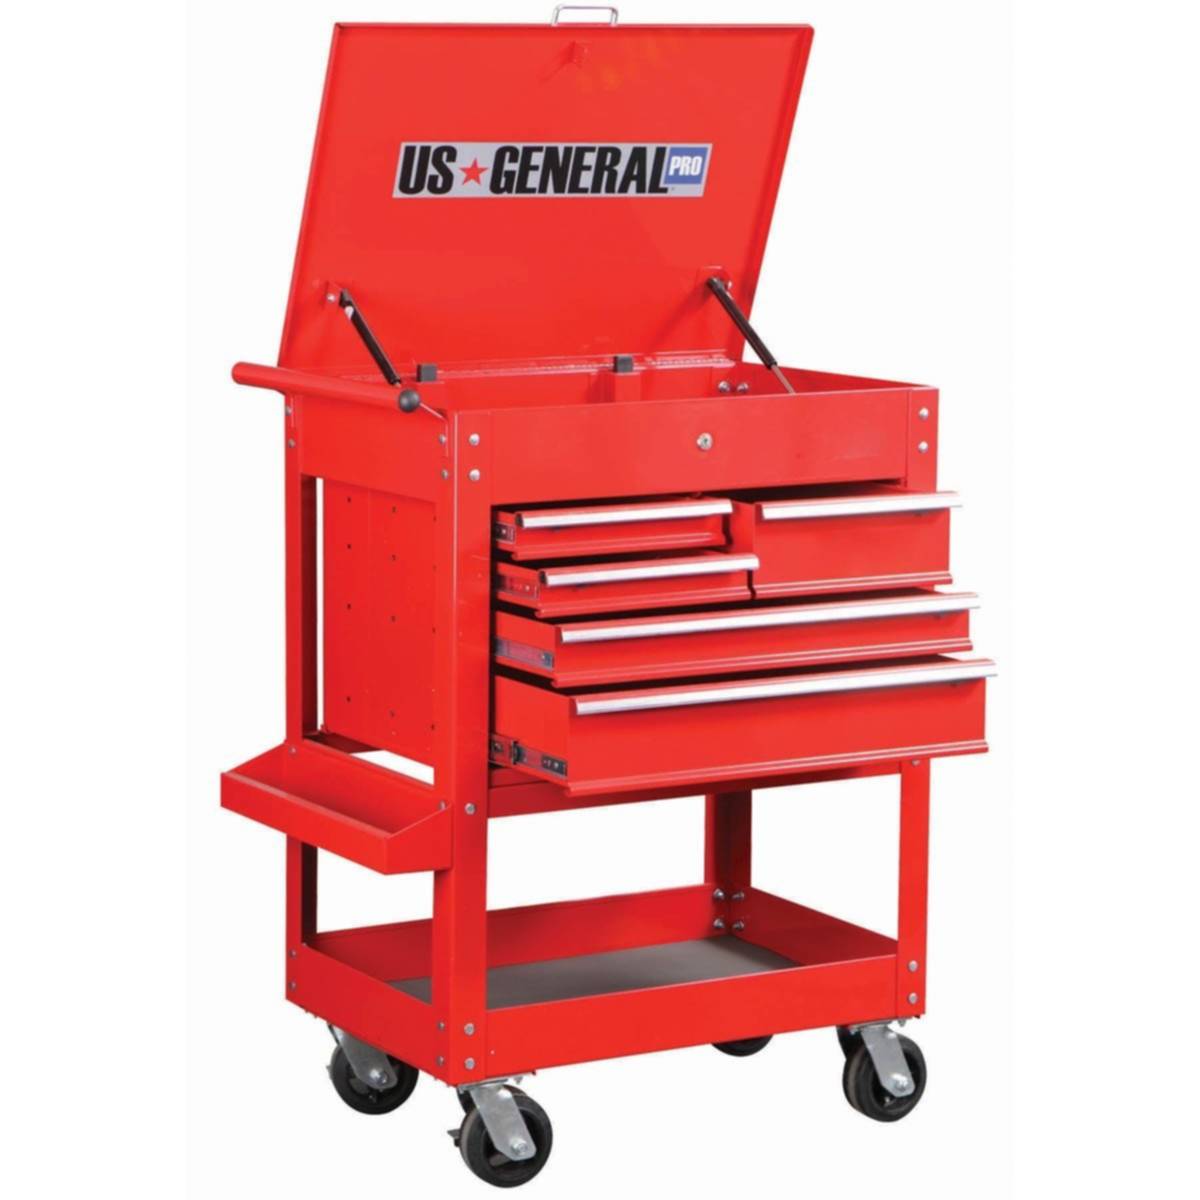 U.S. General 95272 30Inch 5Drawer Glossy Red Tool Cart at Sutherlands